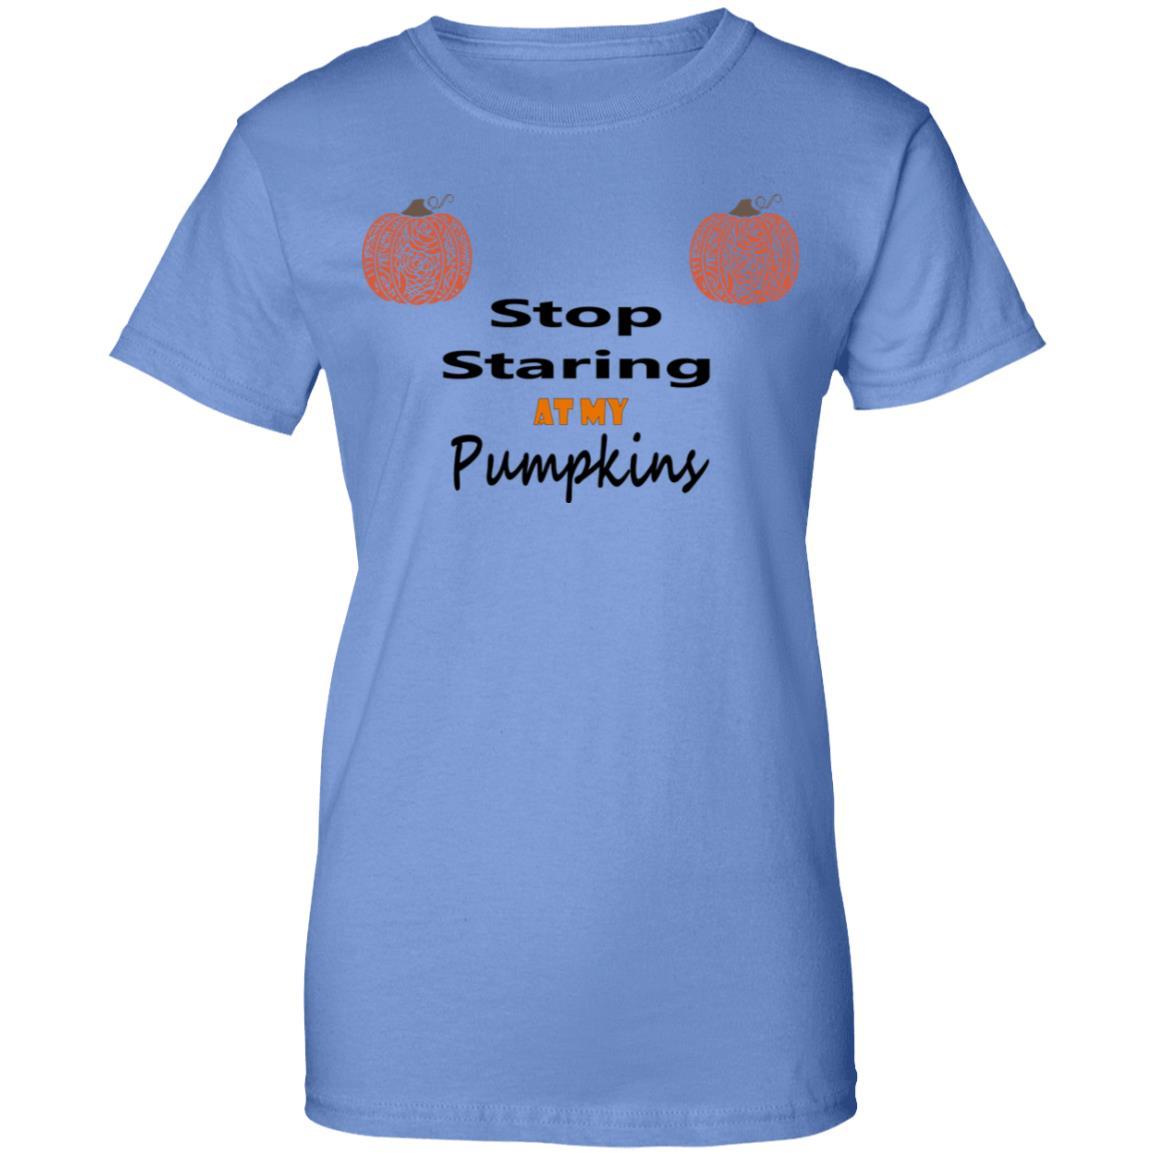 T-Shirts Iris / X-Small WineyBitches.Co "Stop Staring At My Pumpkins" Ladies' 100% Cotton T-Shirt WineyBitchesCo